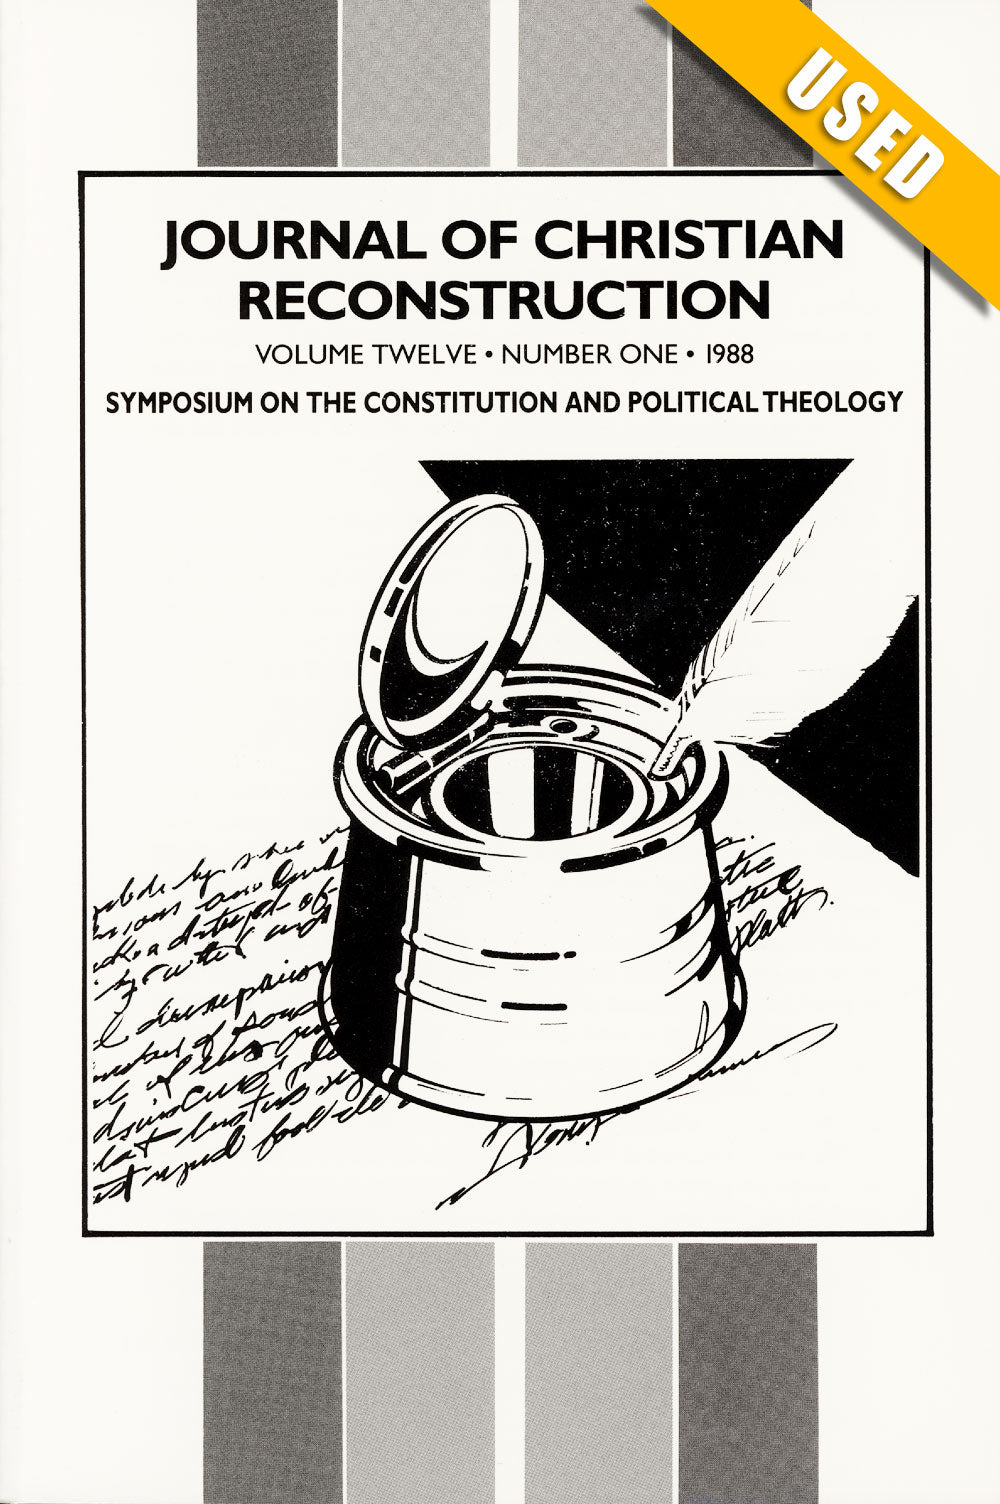 JCR Vol 12 No 1: Symposium on the Constitution and Political Theology